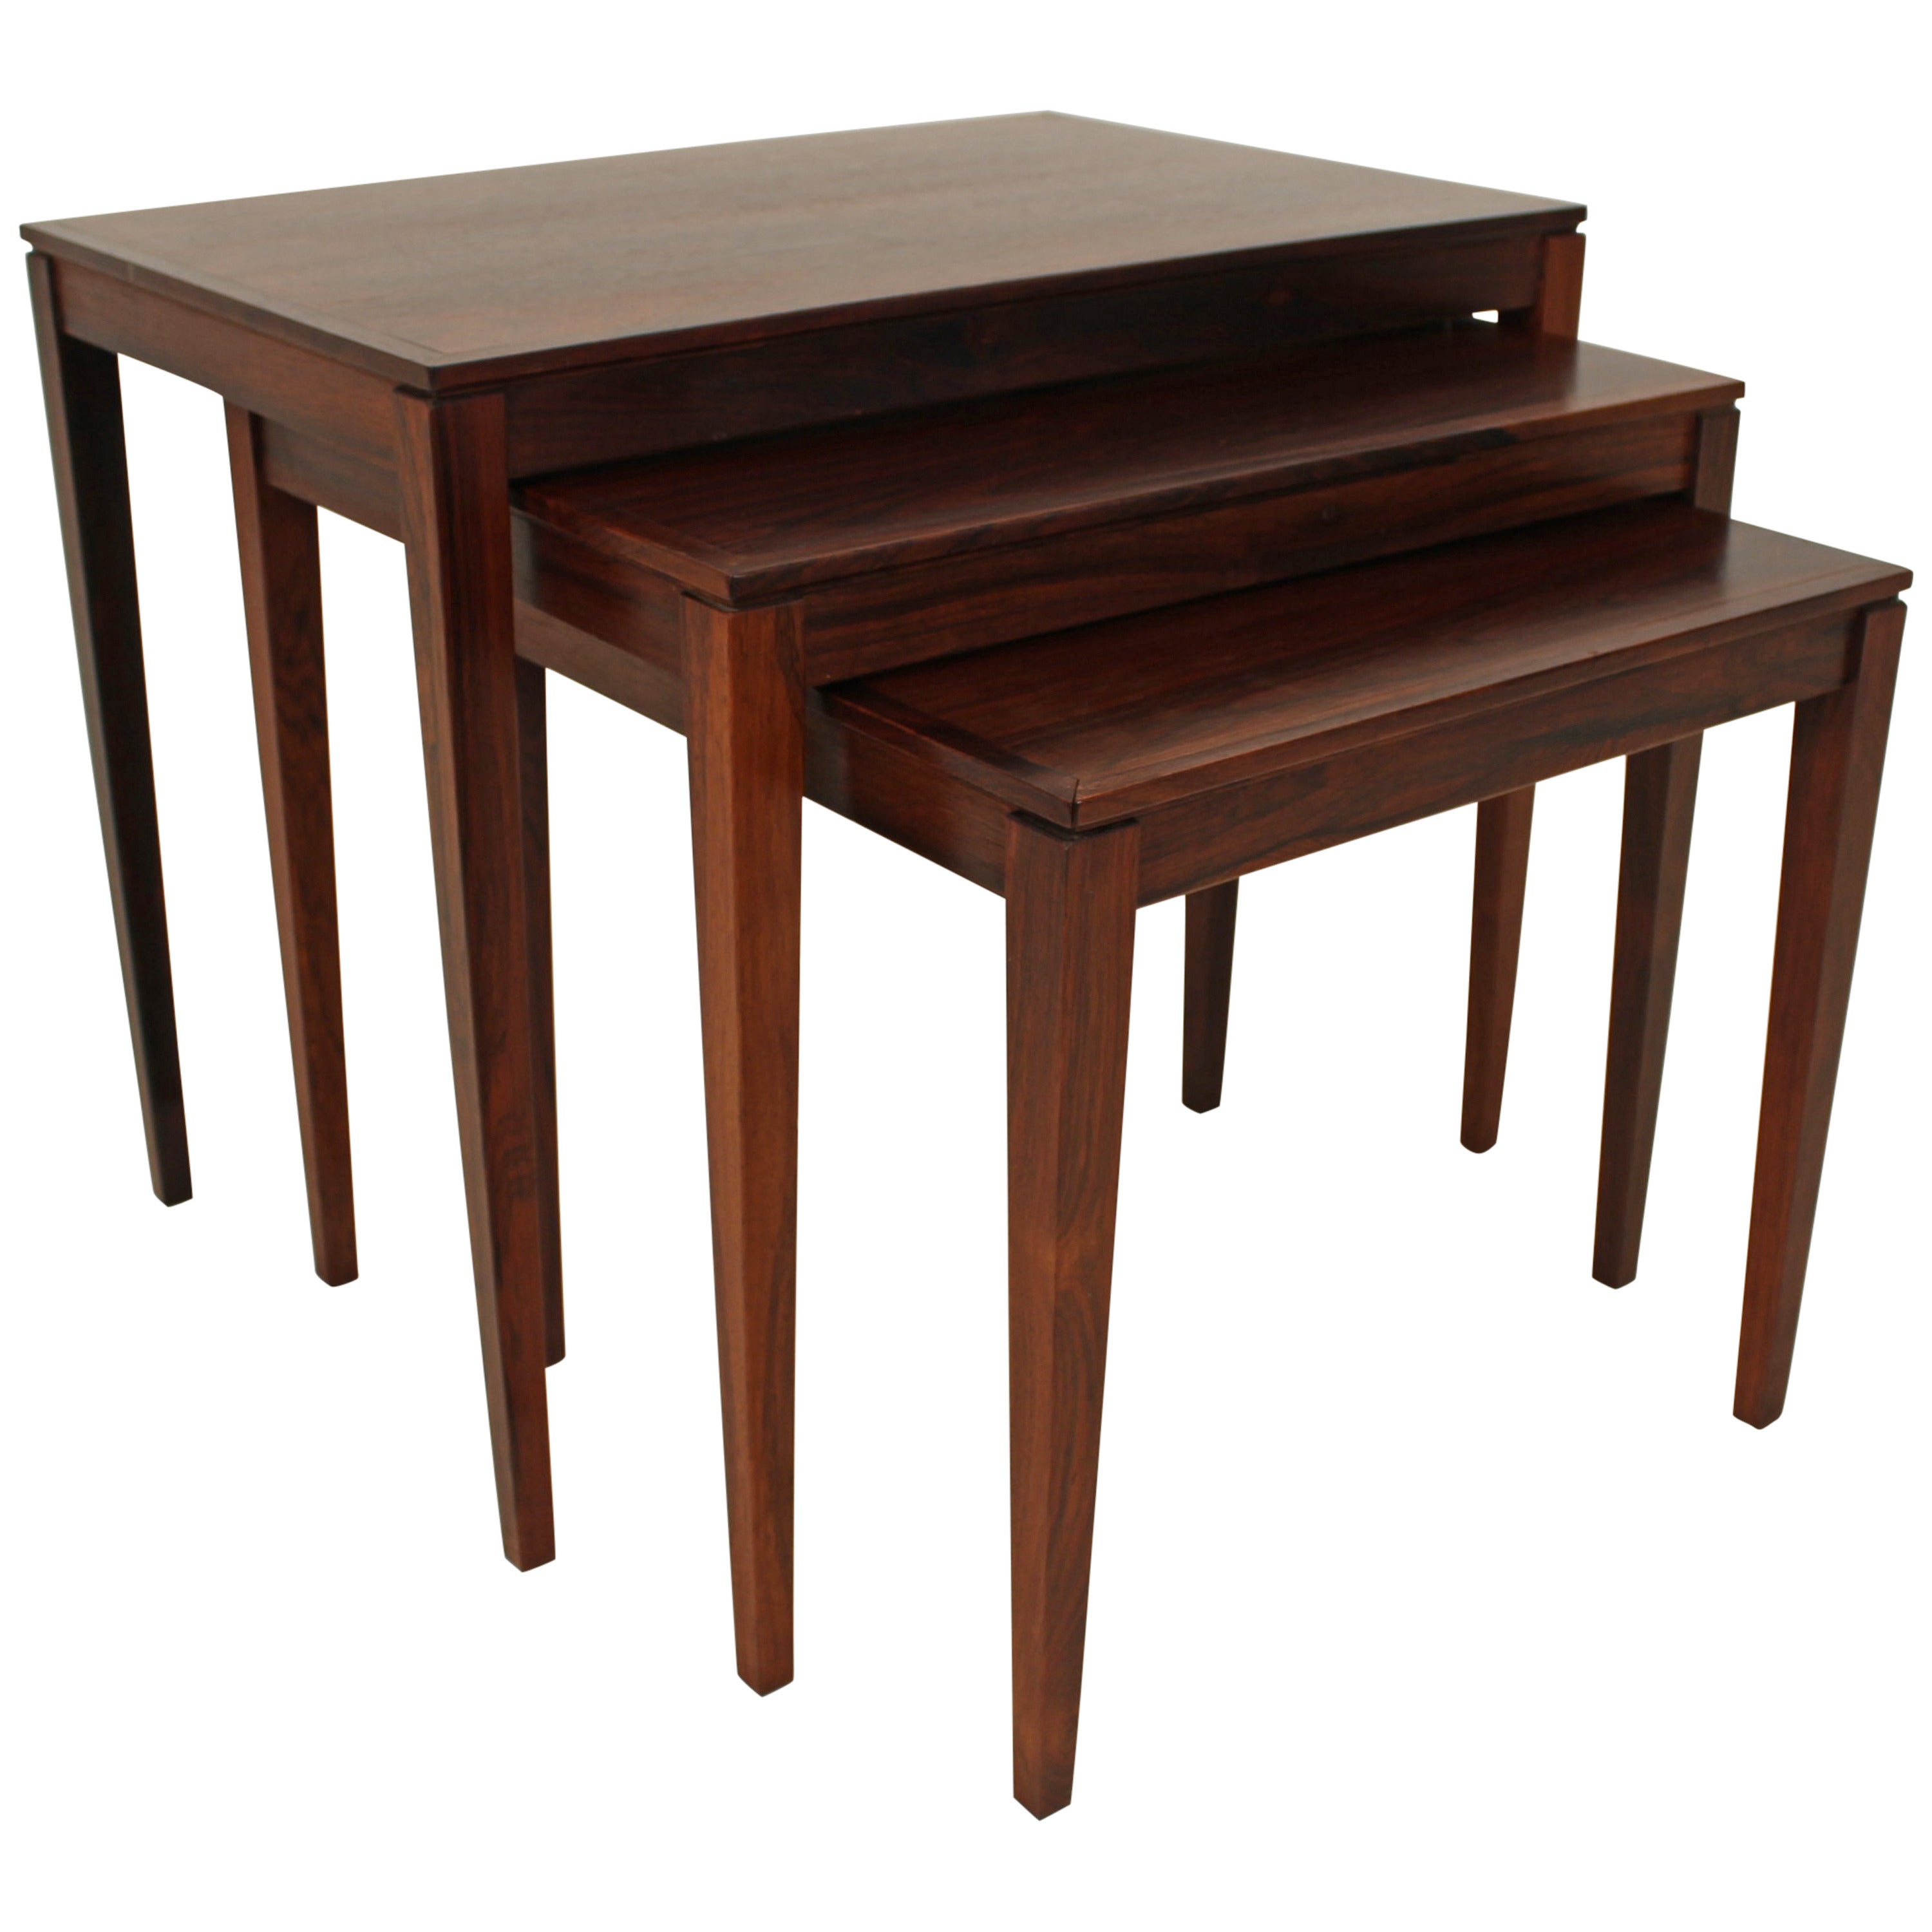 1960s Rosewood Nesting or Stacking Tables